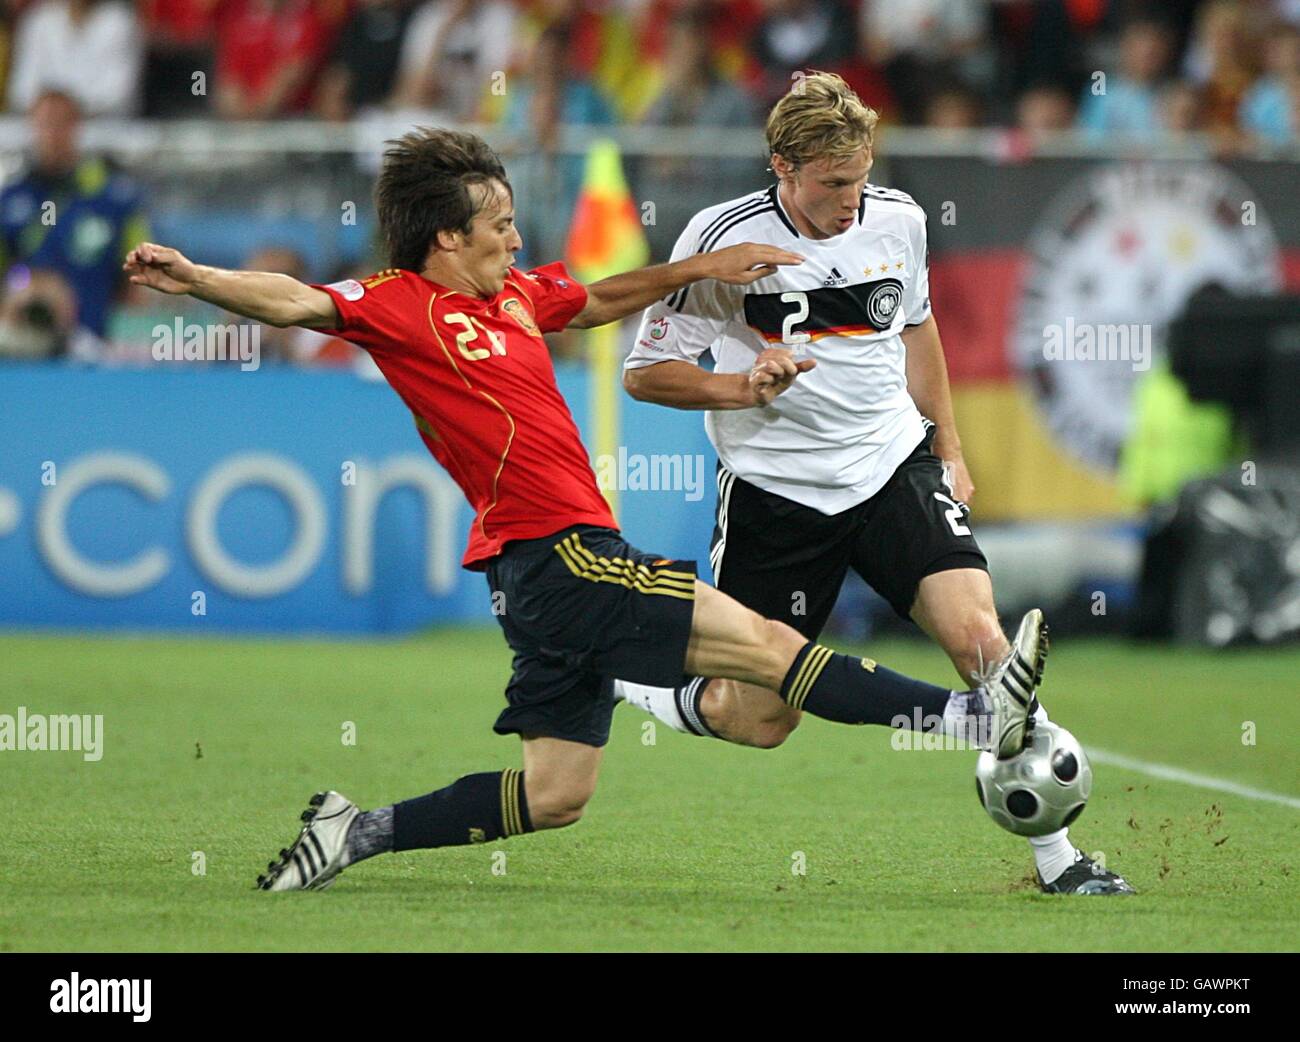 Spain's David Silva challenges Germany's Marcell Jansen for the ball Stock Photo